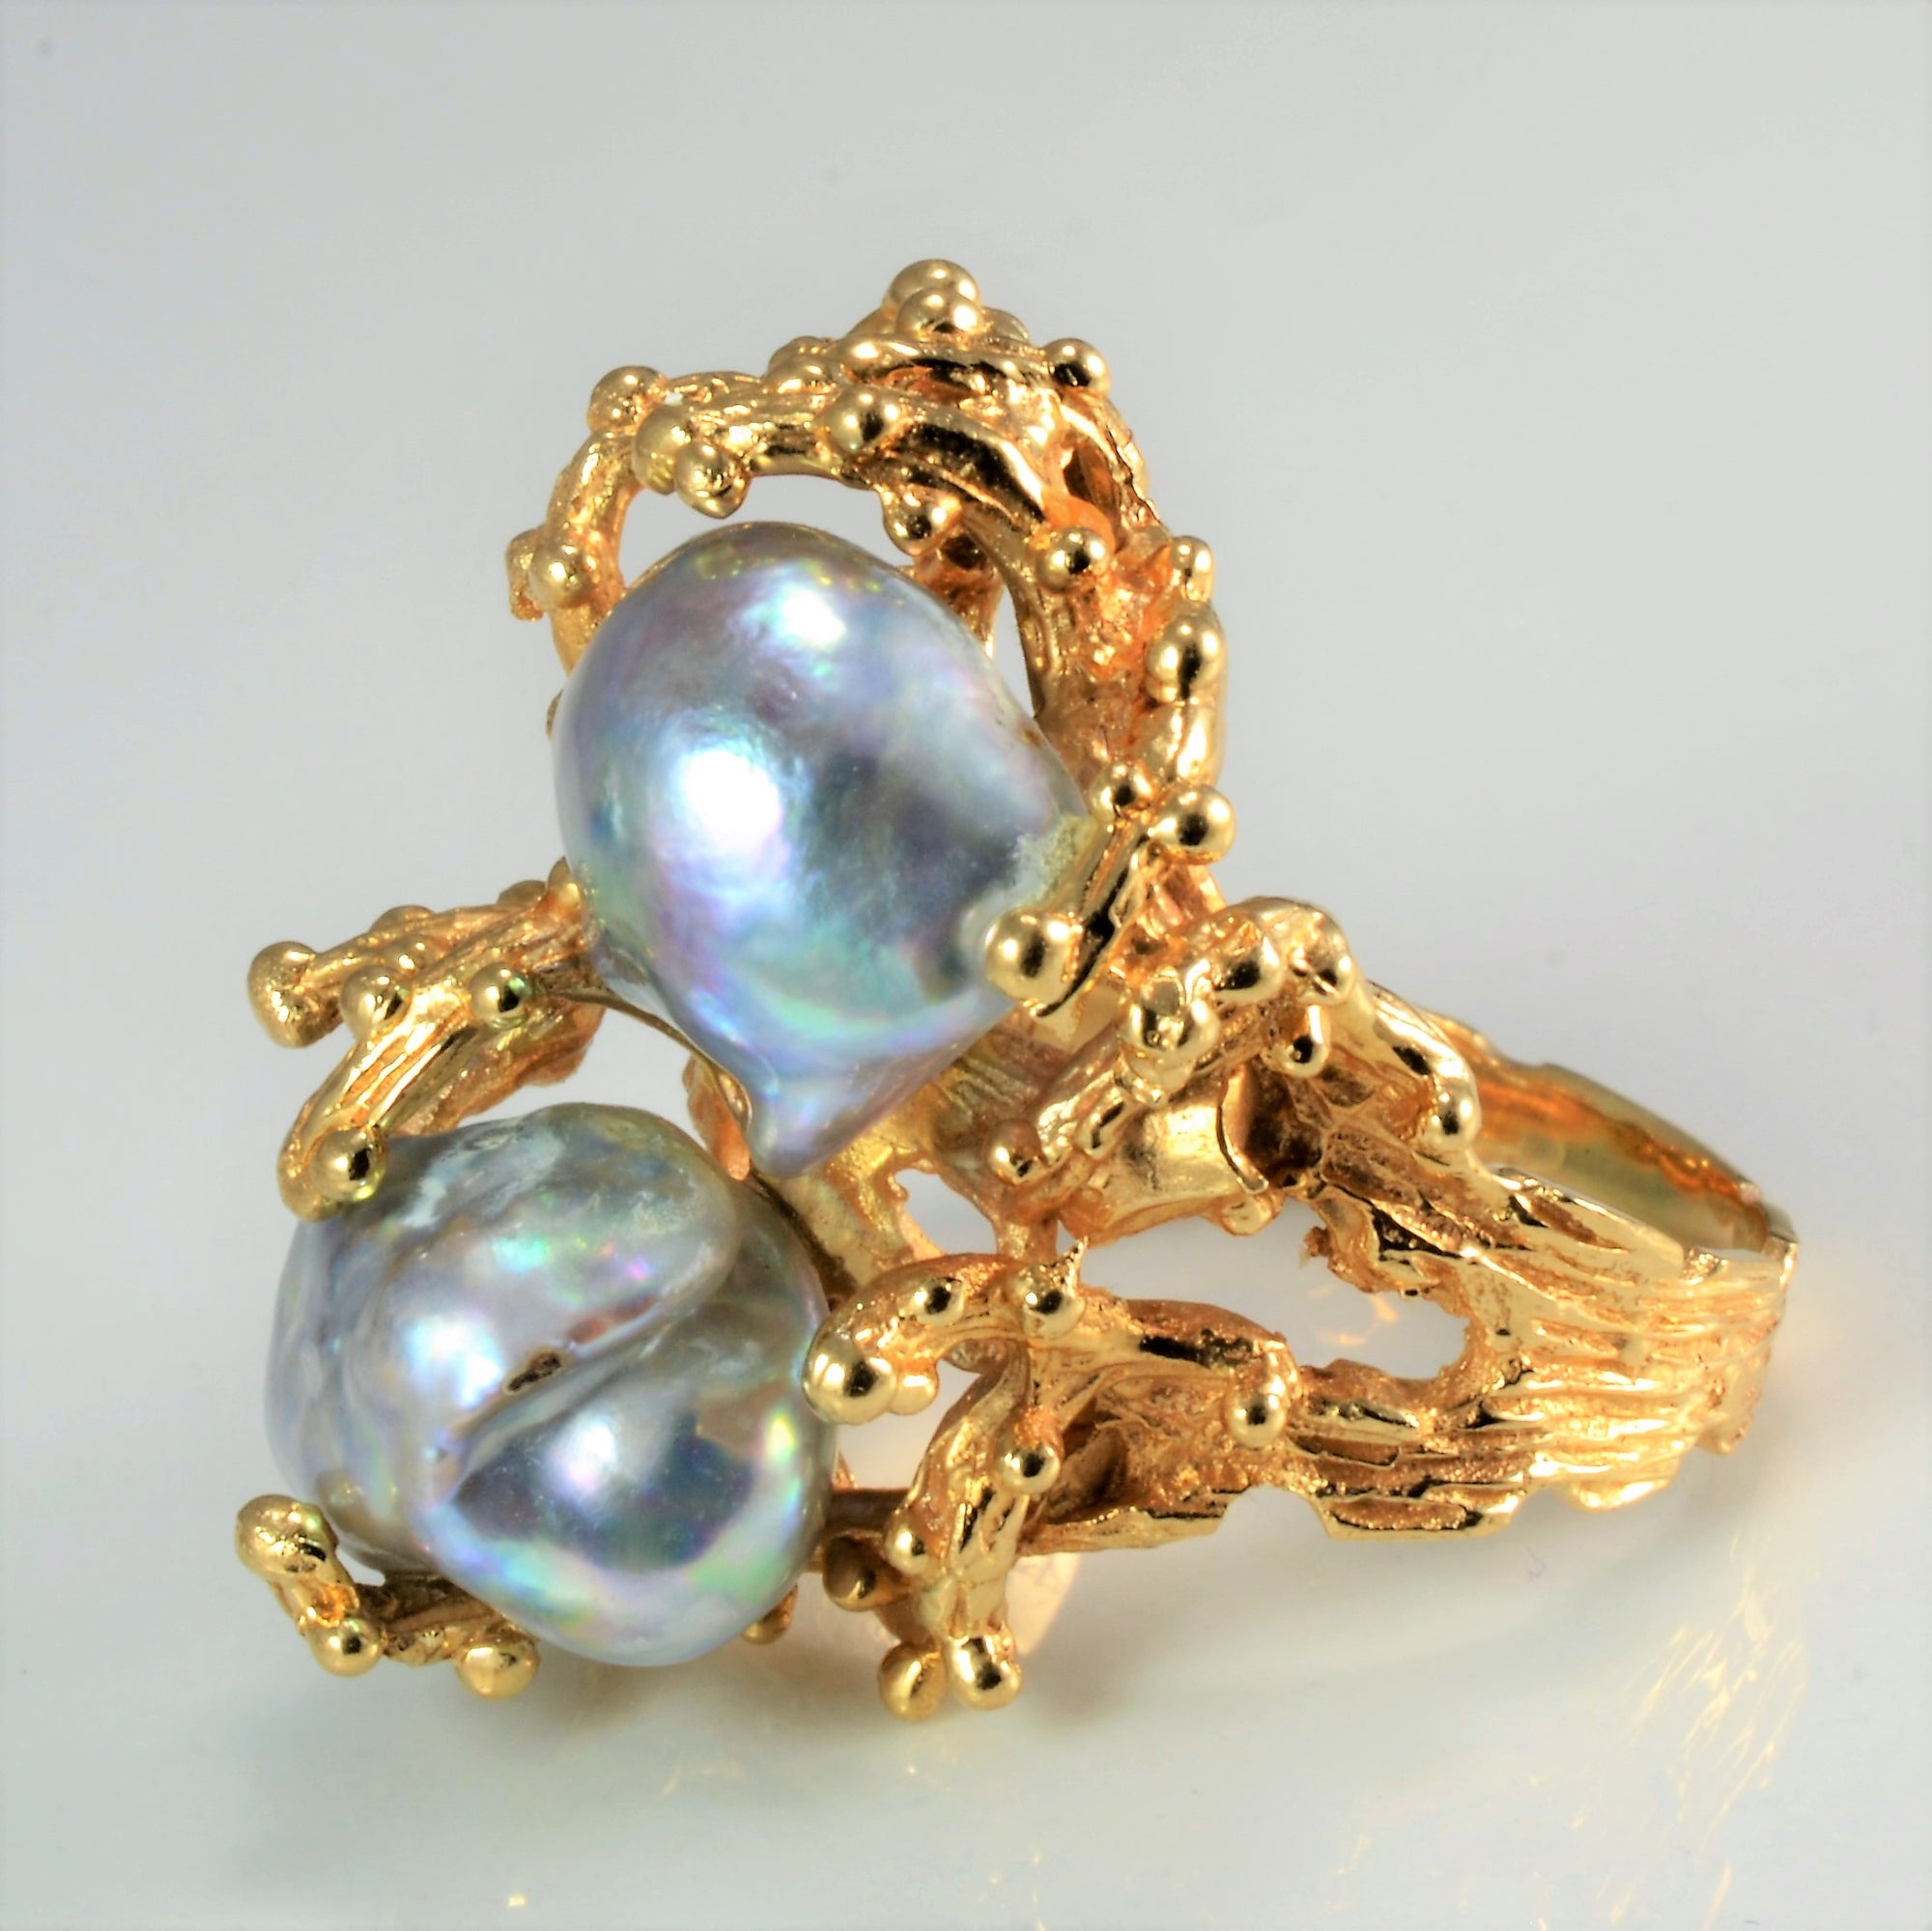 'Birks' 1950s Baroque Pearl Cocktail Ring | SZ 7.25 |